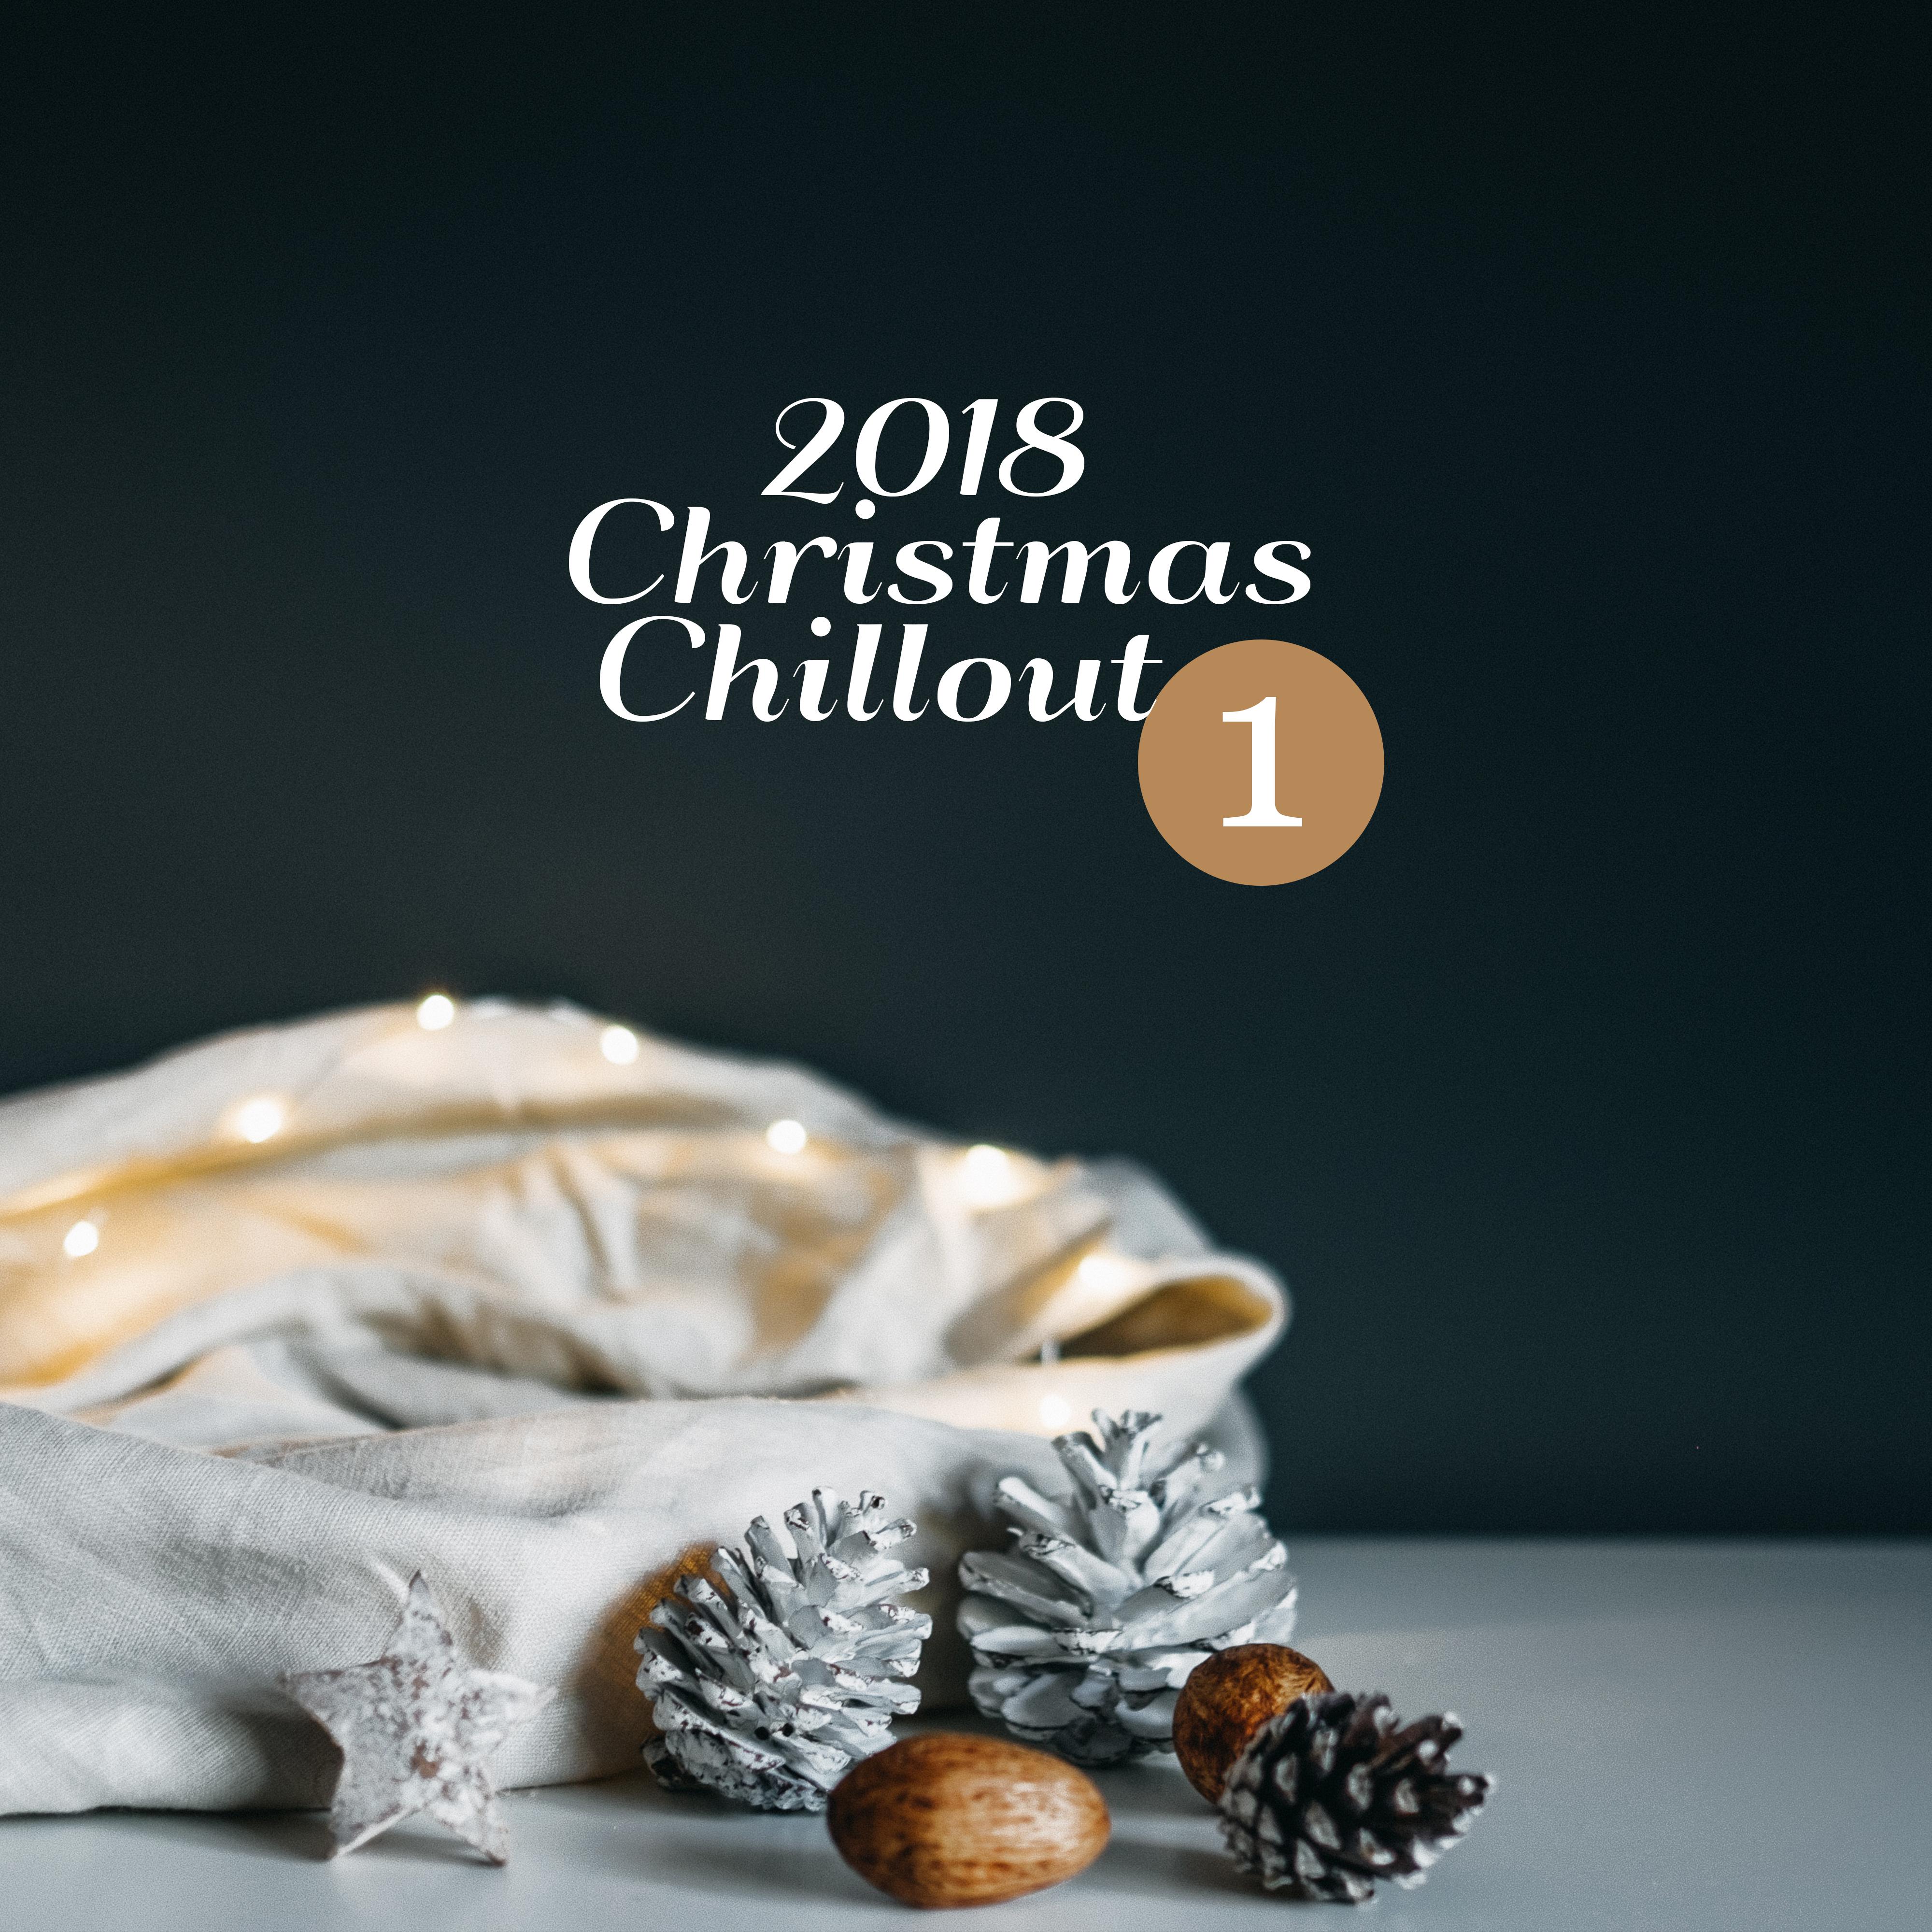 #2018 Christmas Chillout 1